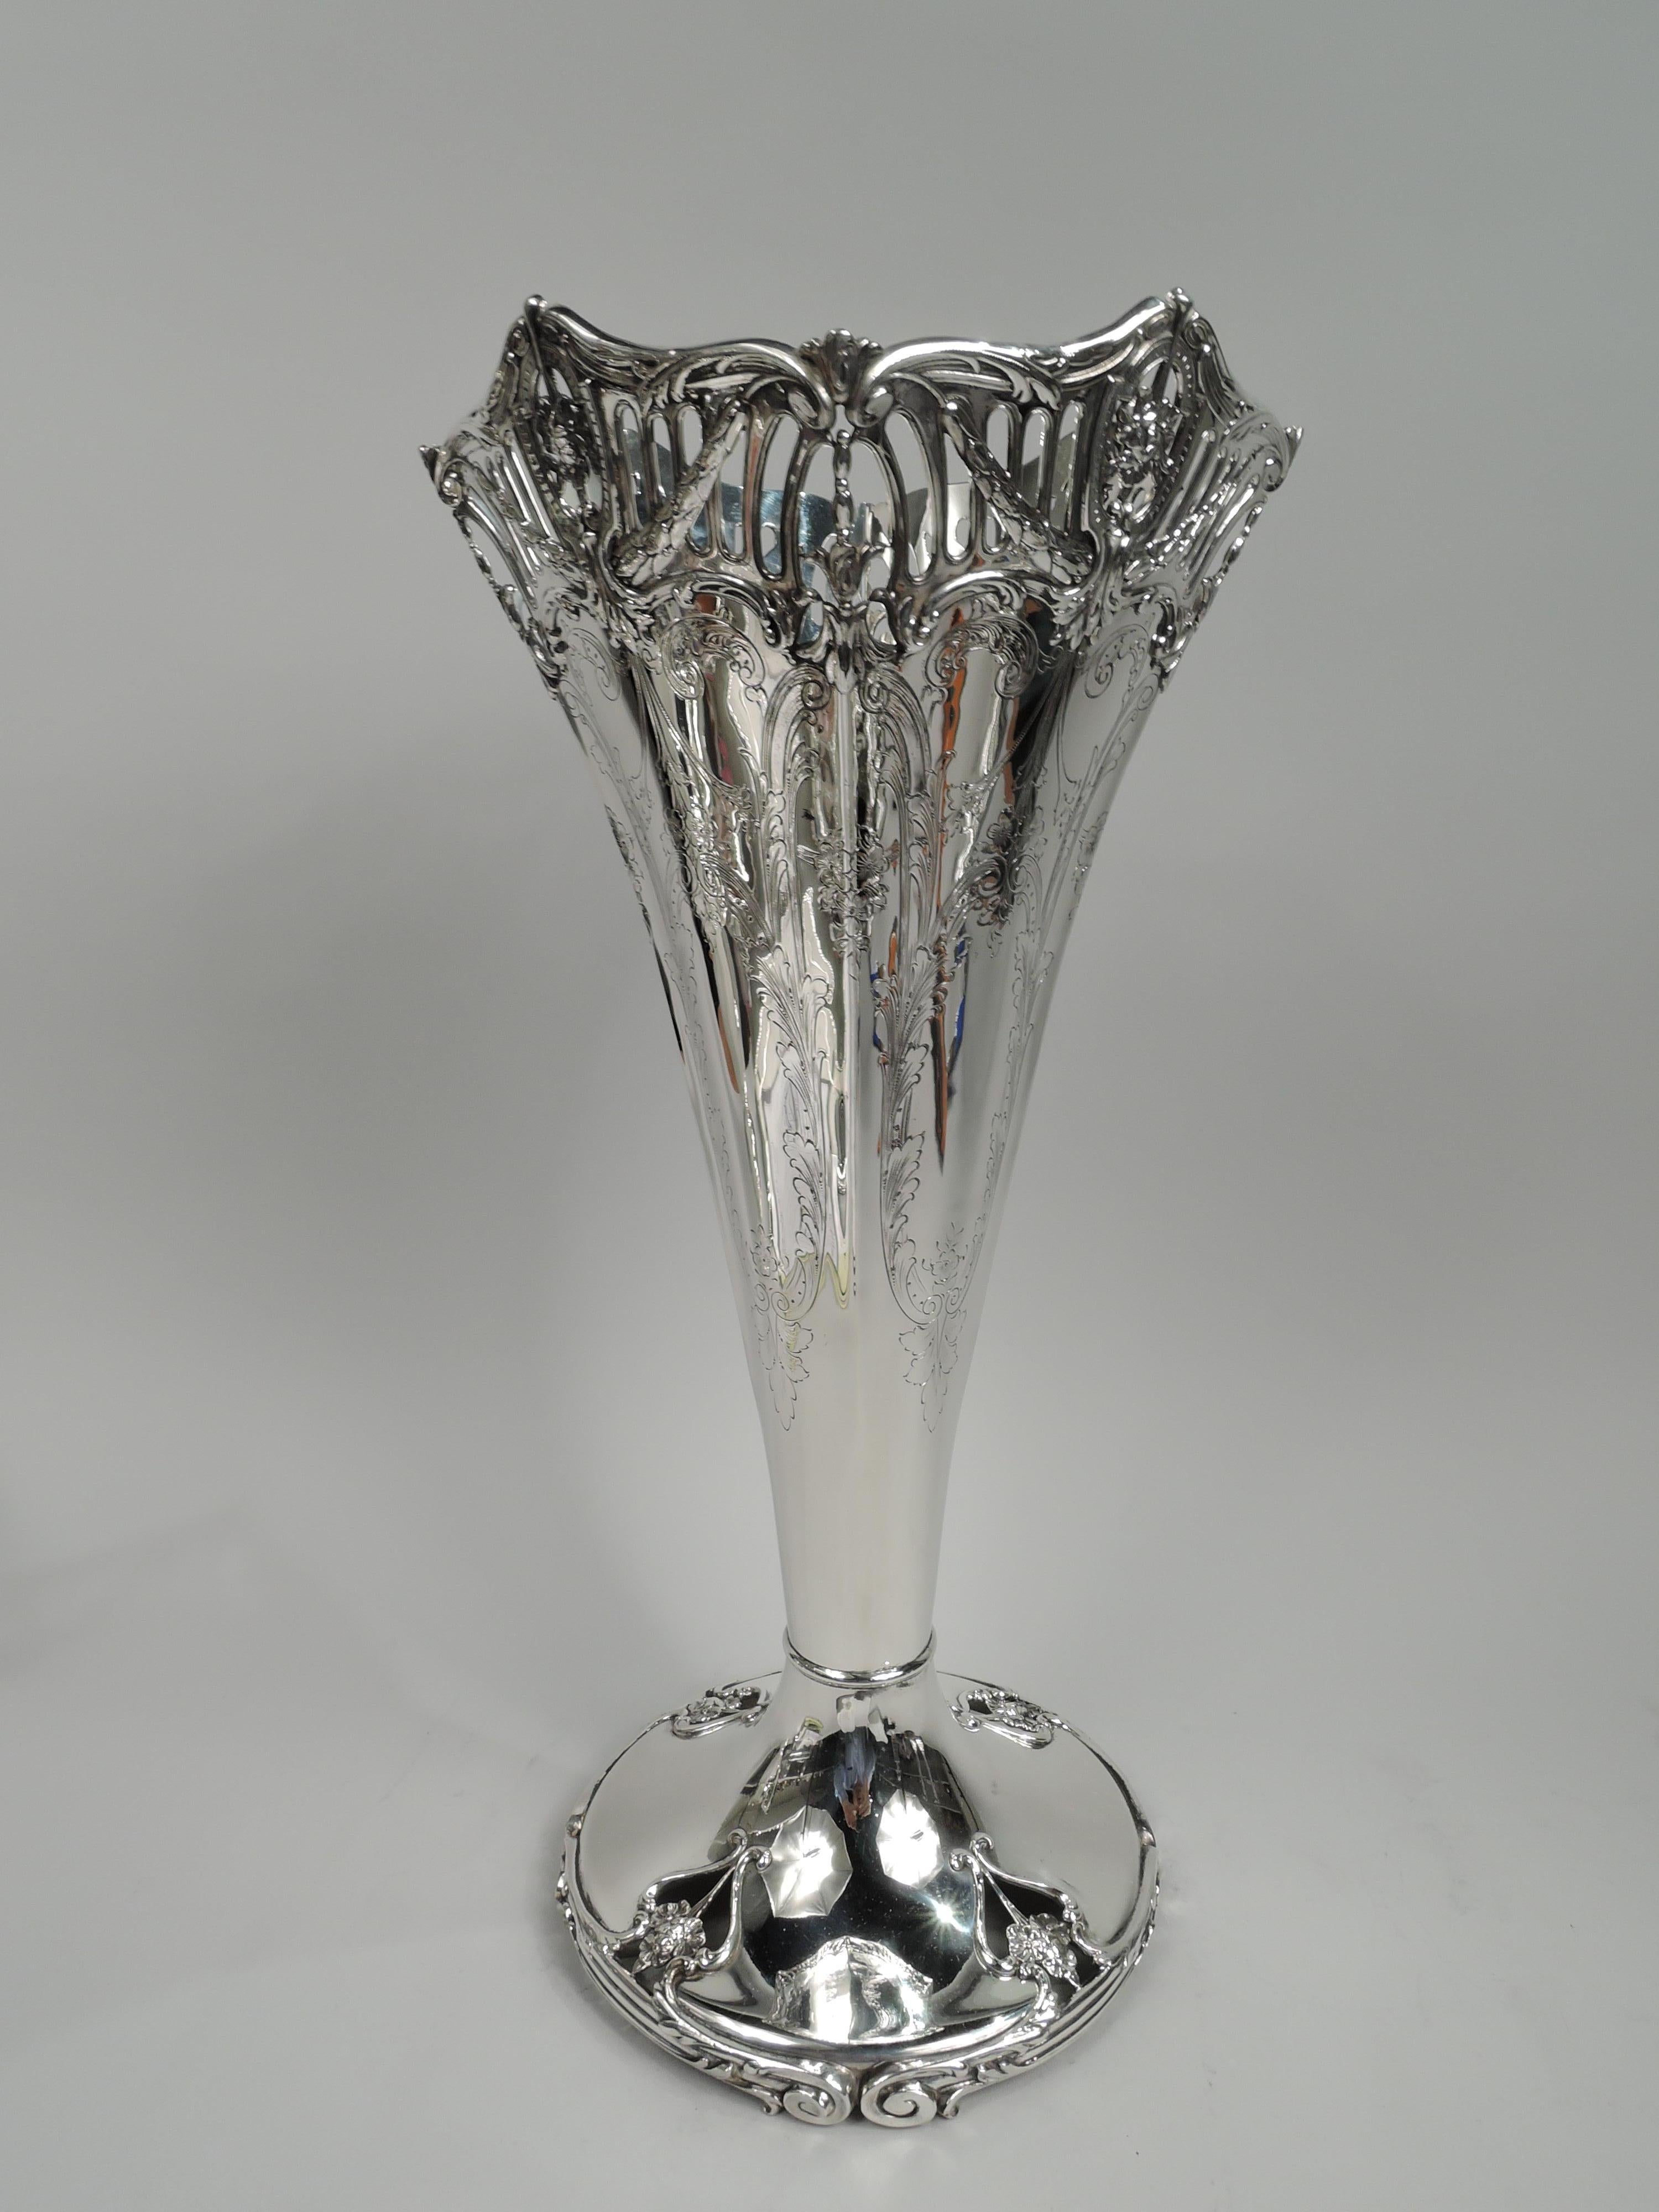 Edwardian Regency sterling silver trumpet vase. Made by Graff, Washbourne & Dunn in New York, ca 1910. Four curved sides. At top tubular piercing overlaid with swags, and open heraldic shields inset with pendant flowers. Rims scrolled and